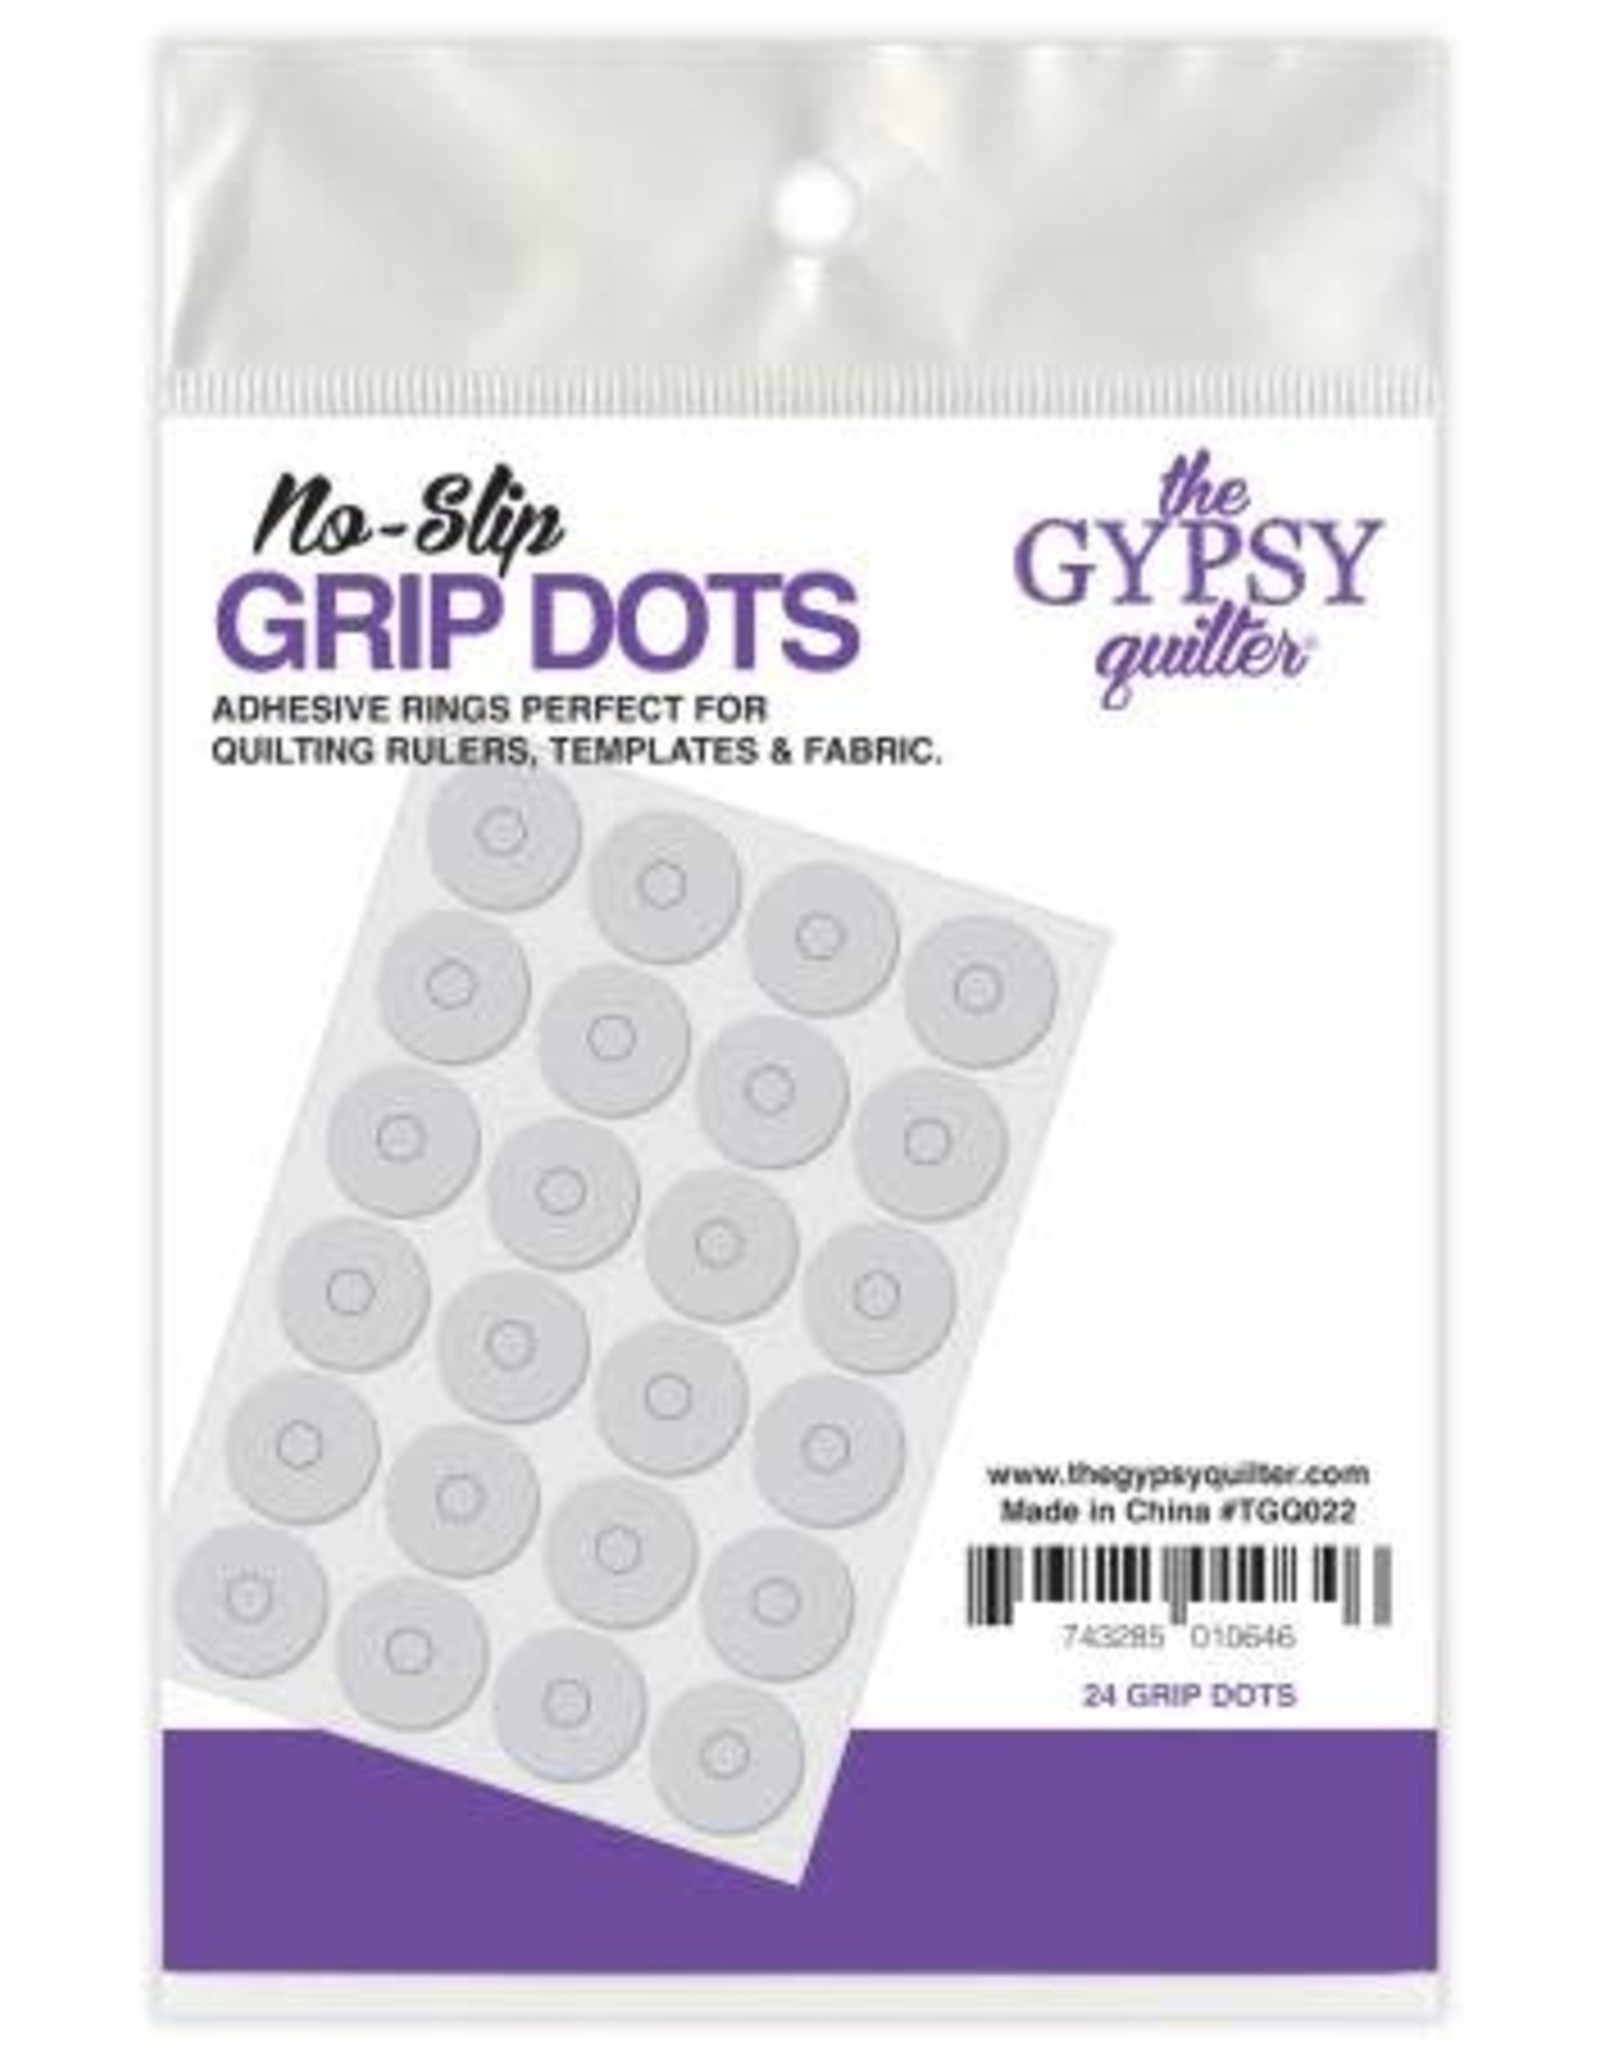 Gypsy Quilter No-slip grip Dots